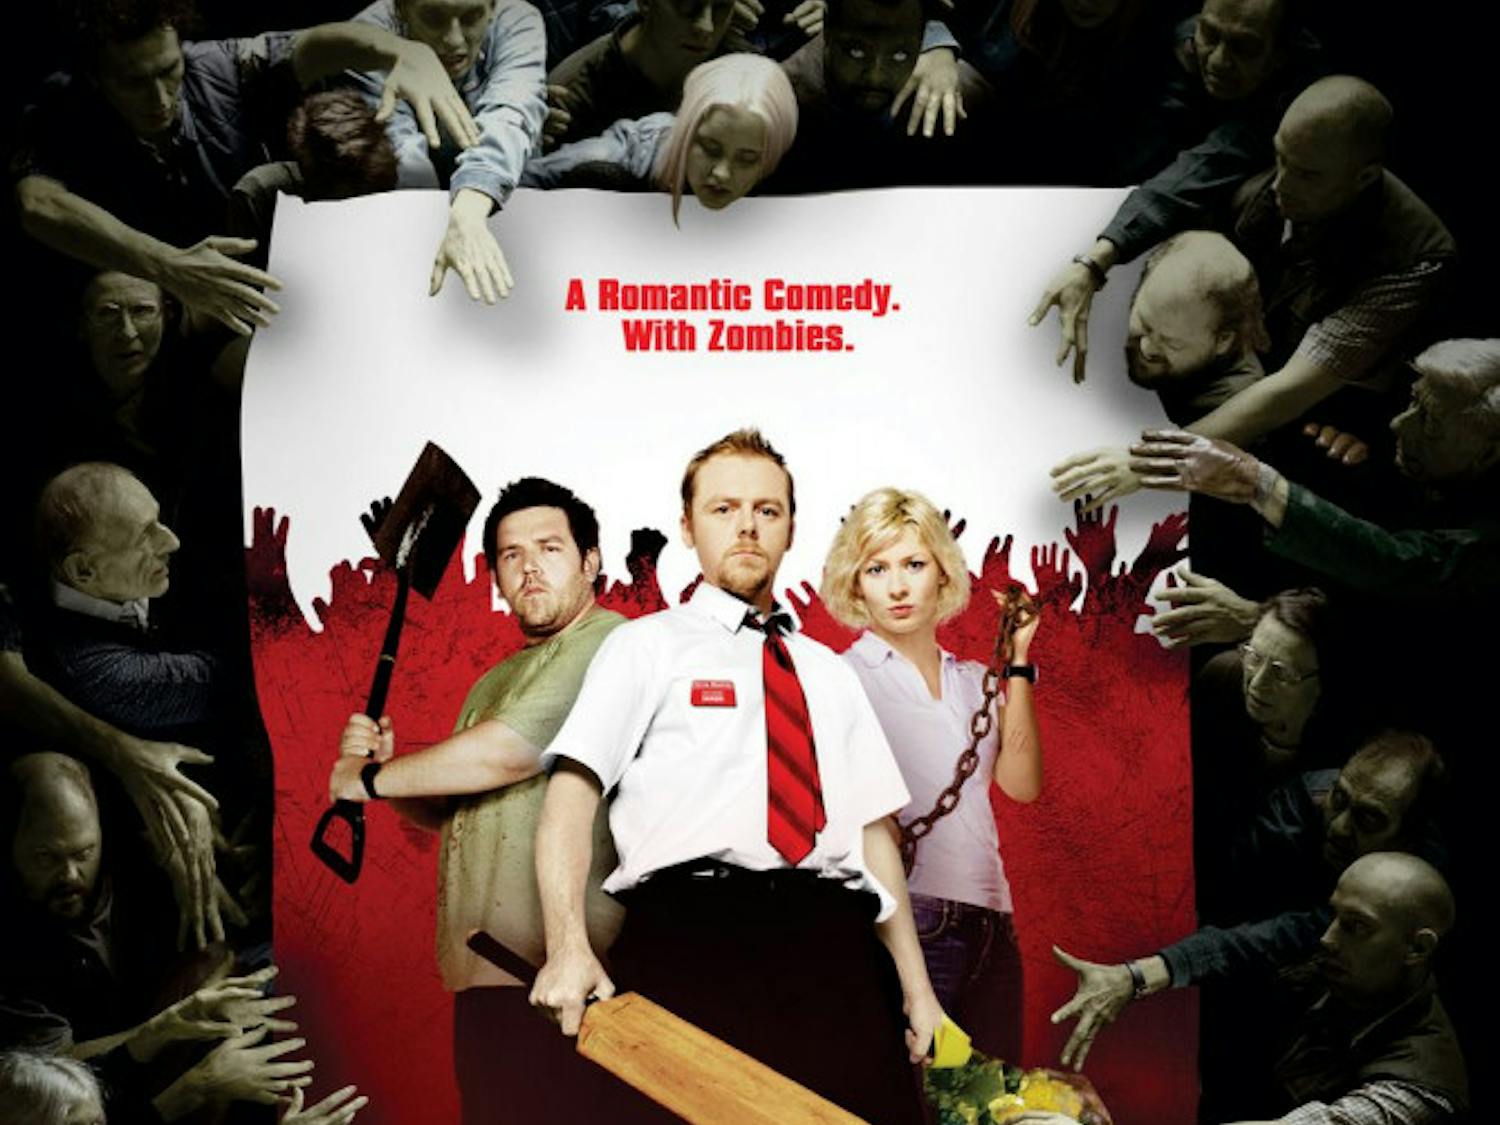 Shaun-of-the-Dead-Poster